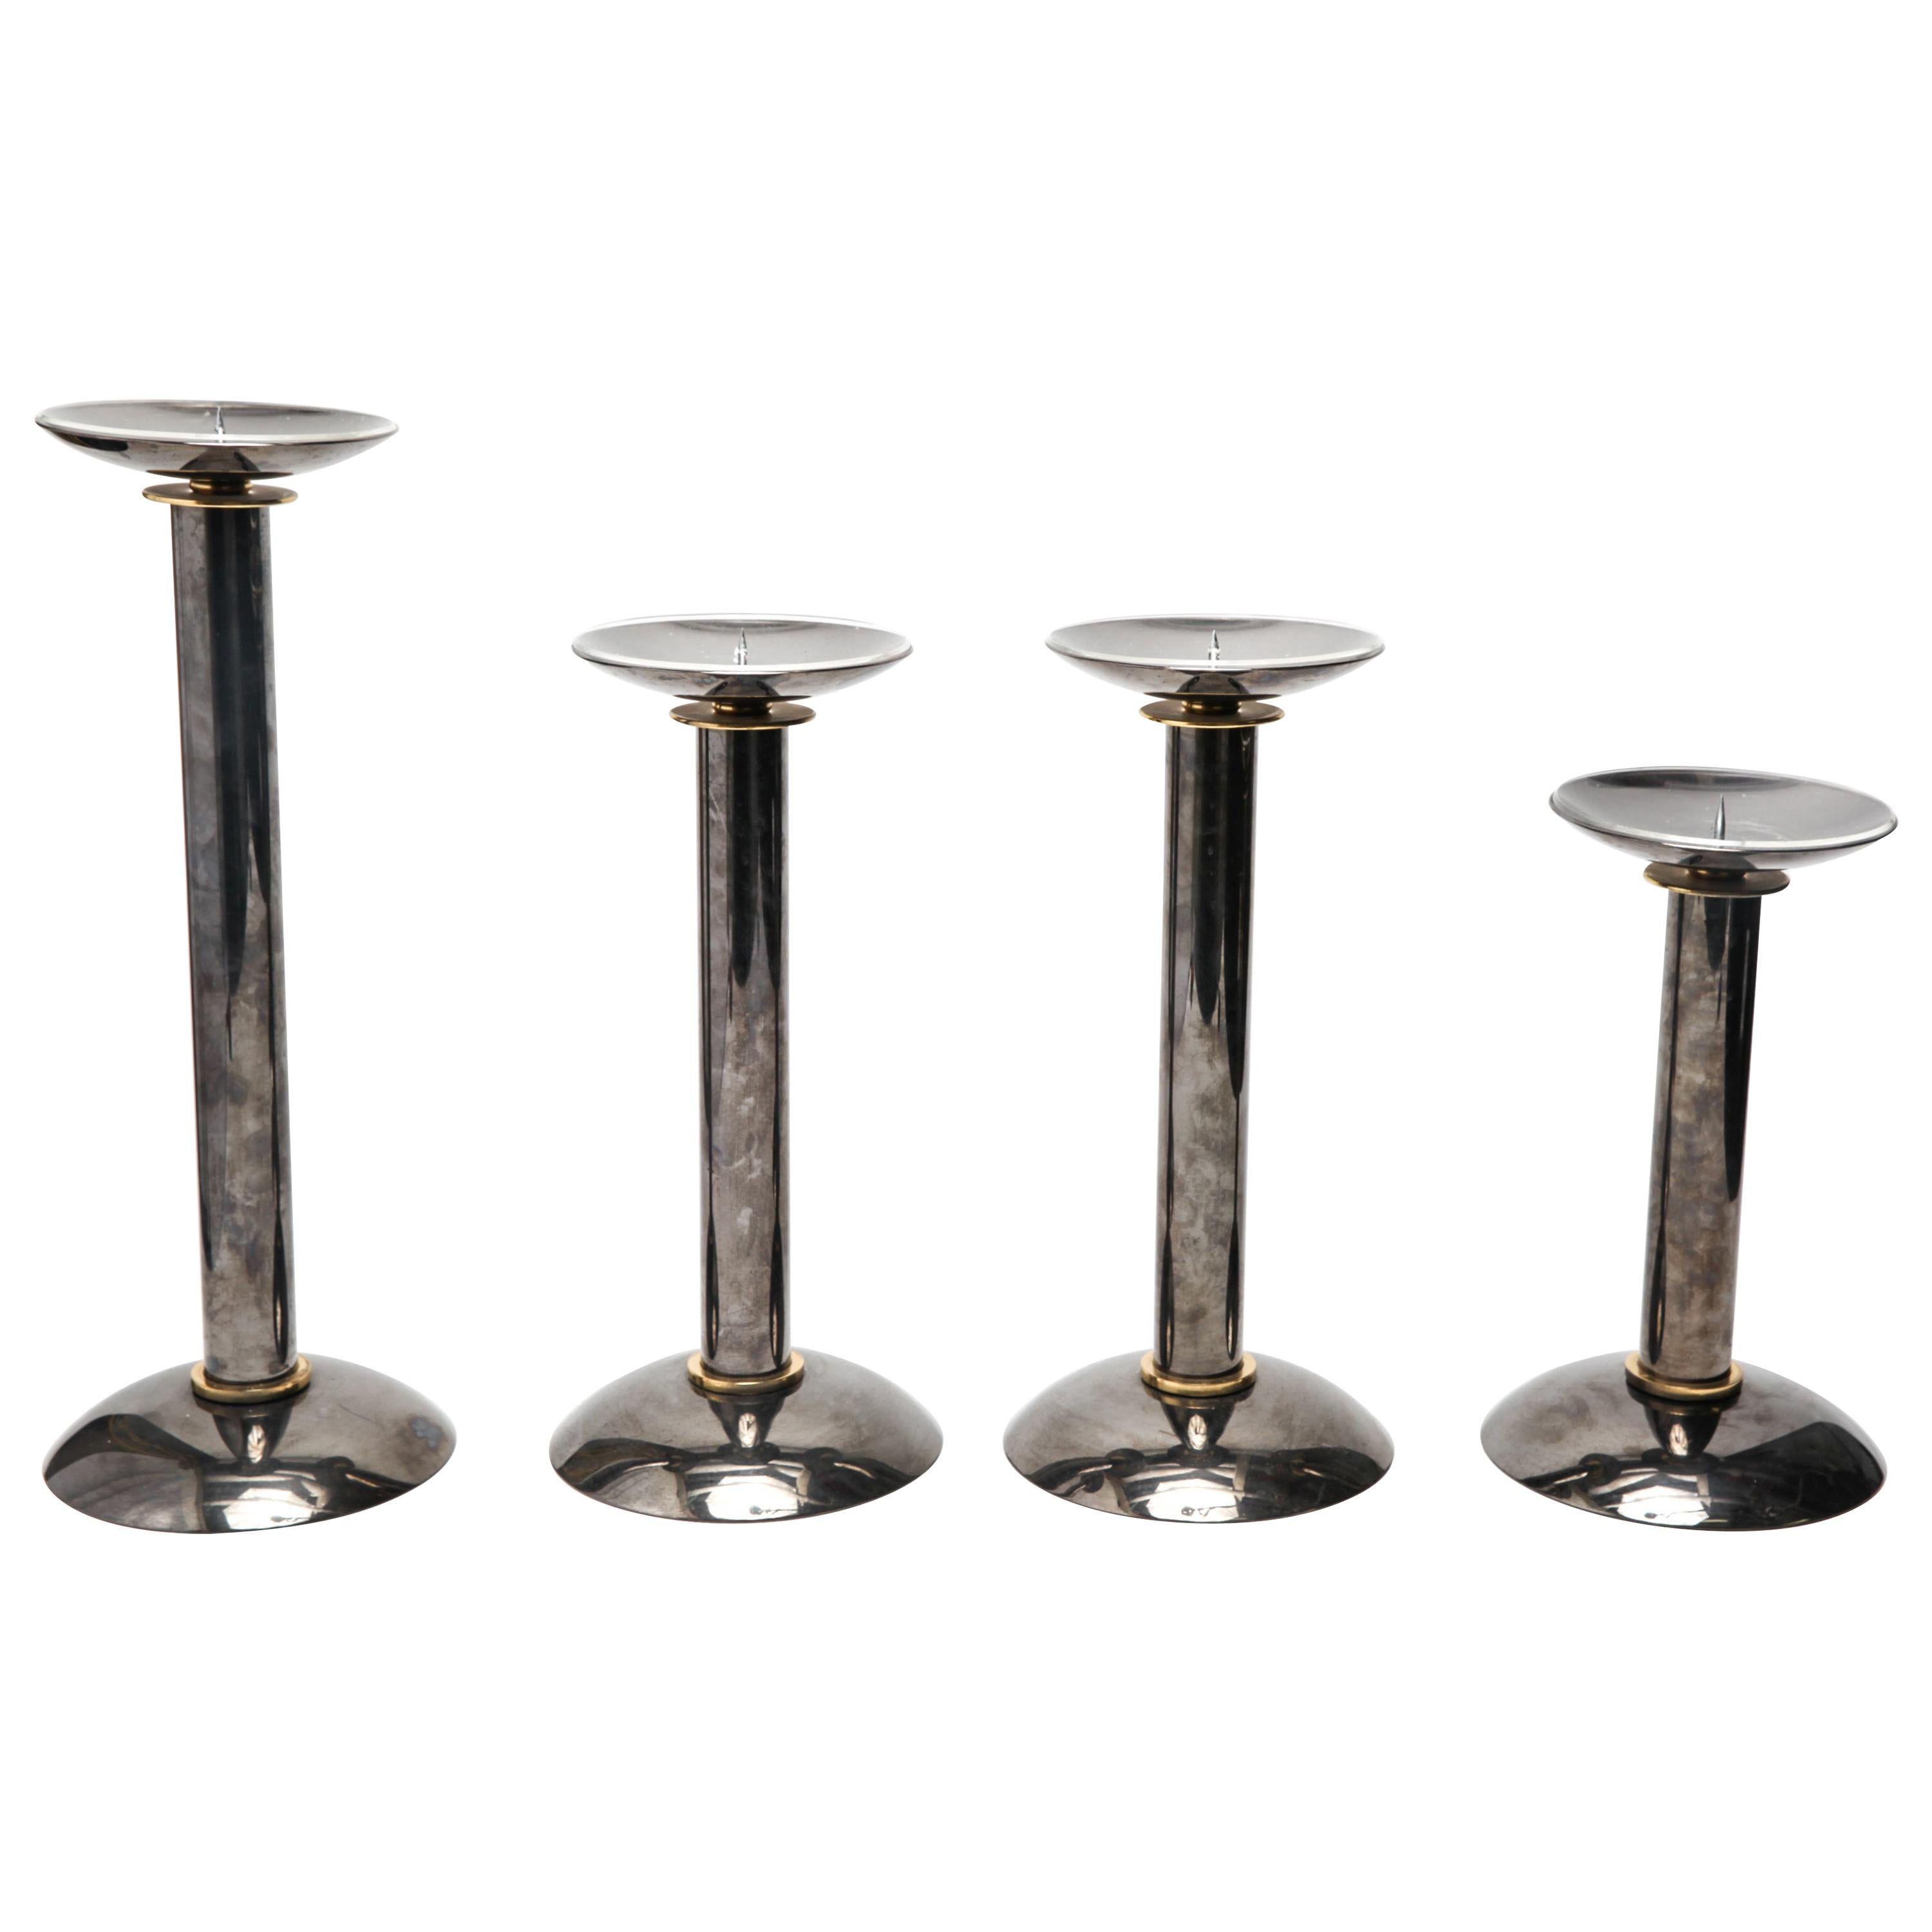 Modern metal pillar or pricket candlesticks / candleholders, with pewter tone body and brass accents. The set is on round bases. 2 pieces in different sizes. In great vintage condition with age-appropriate wear and use.
Measures: Largest 20